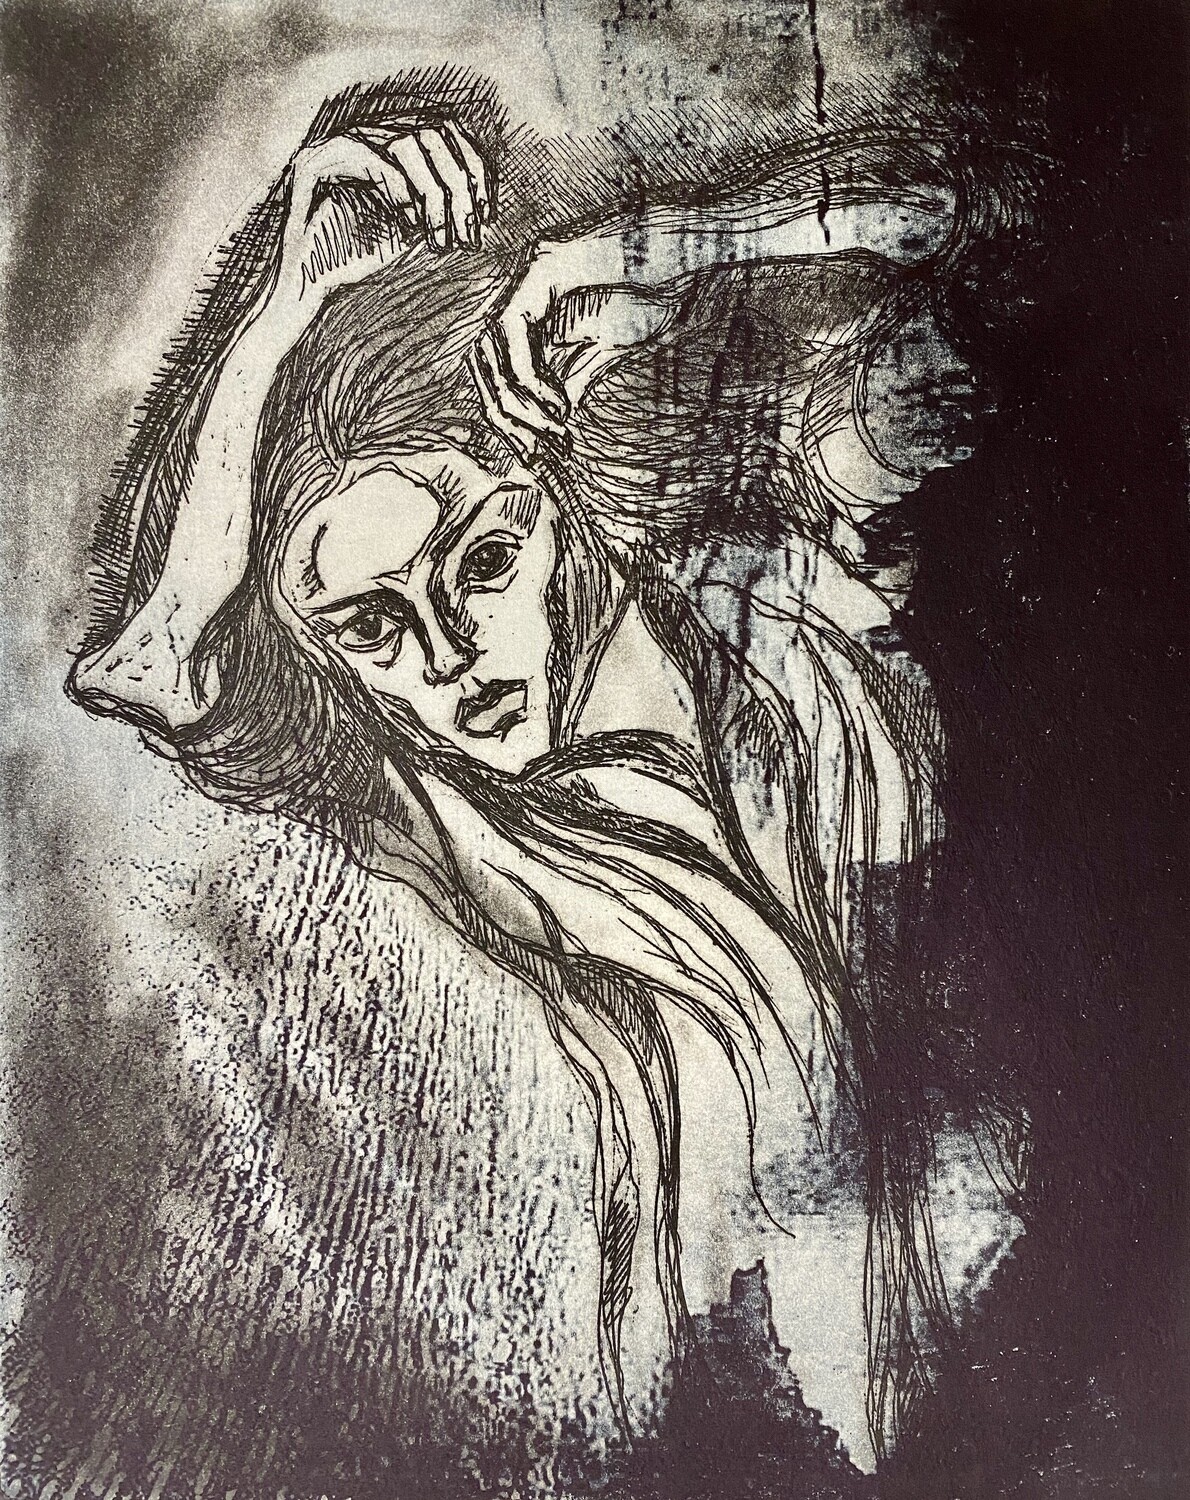 "Thoughts and Dreams", etching with solar plate etching